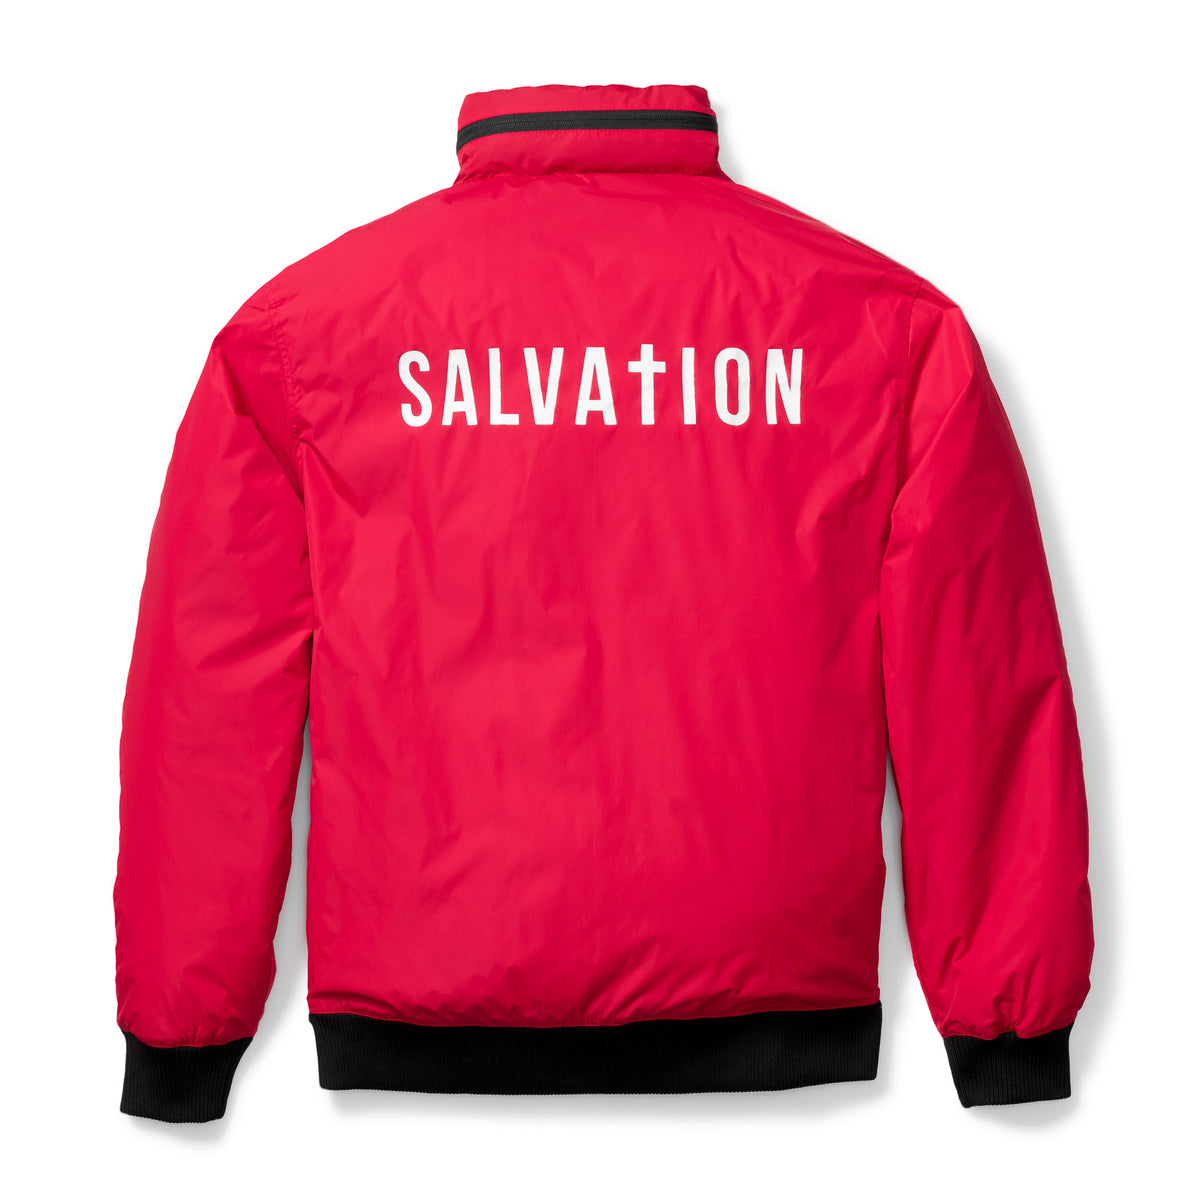 Salvation Bomber Jacket with Concealed Hood - Red